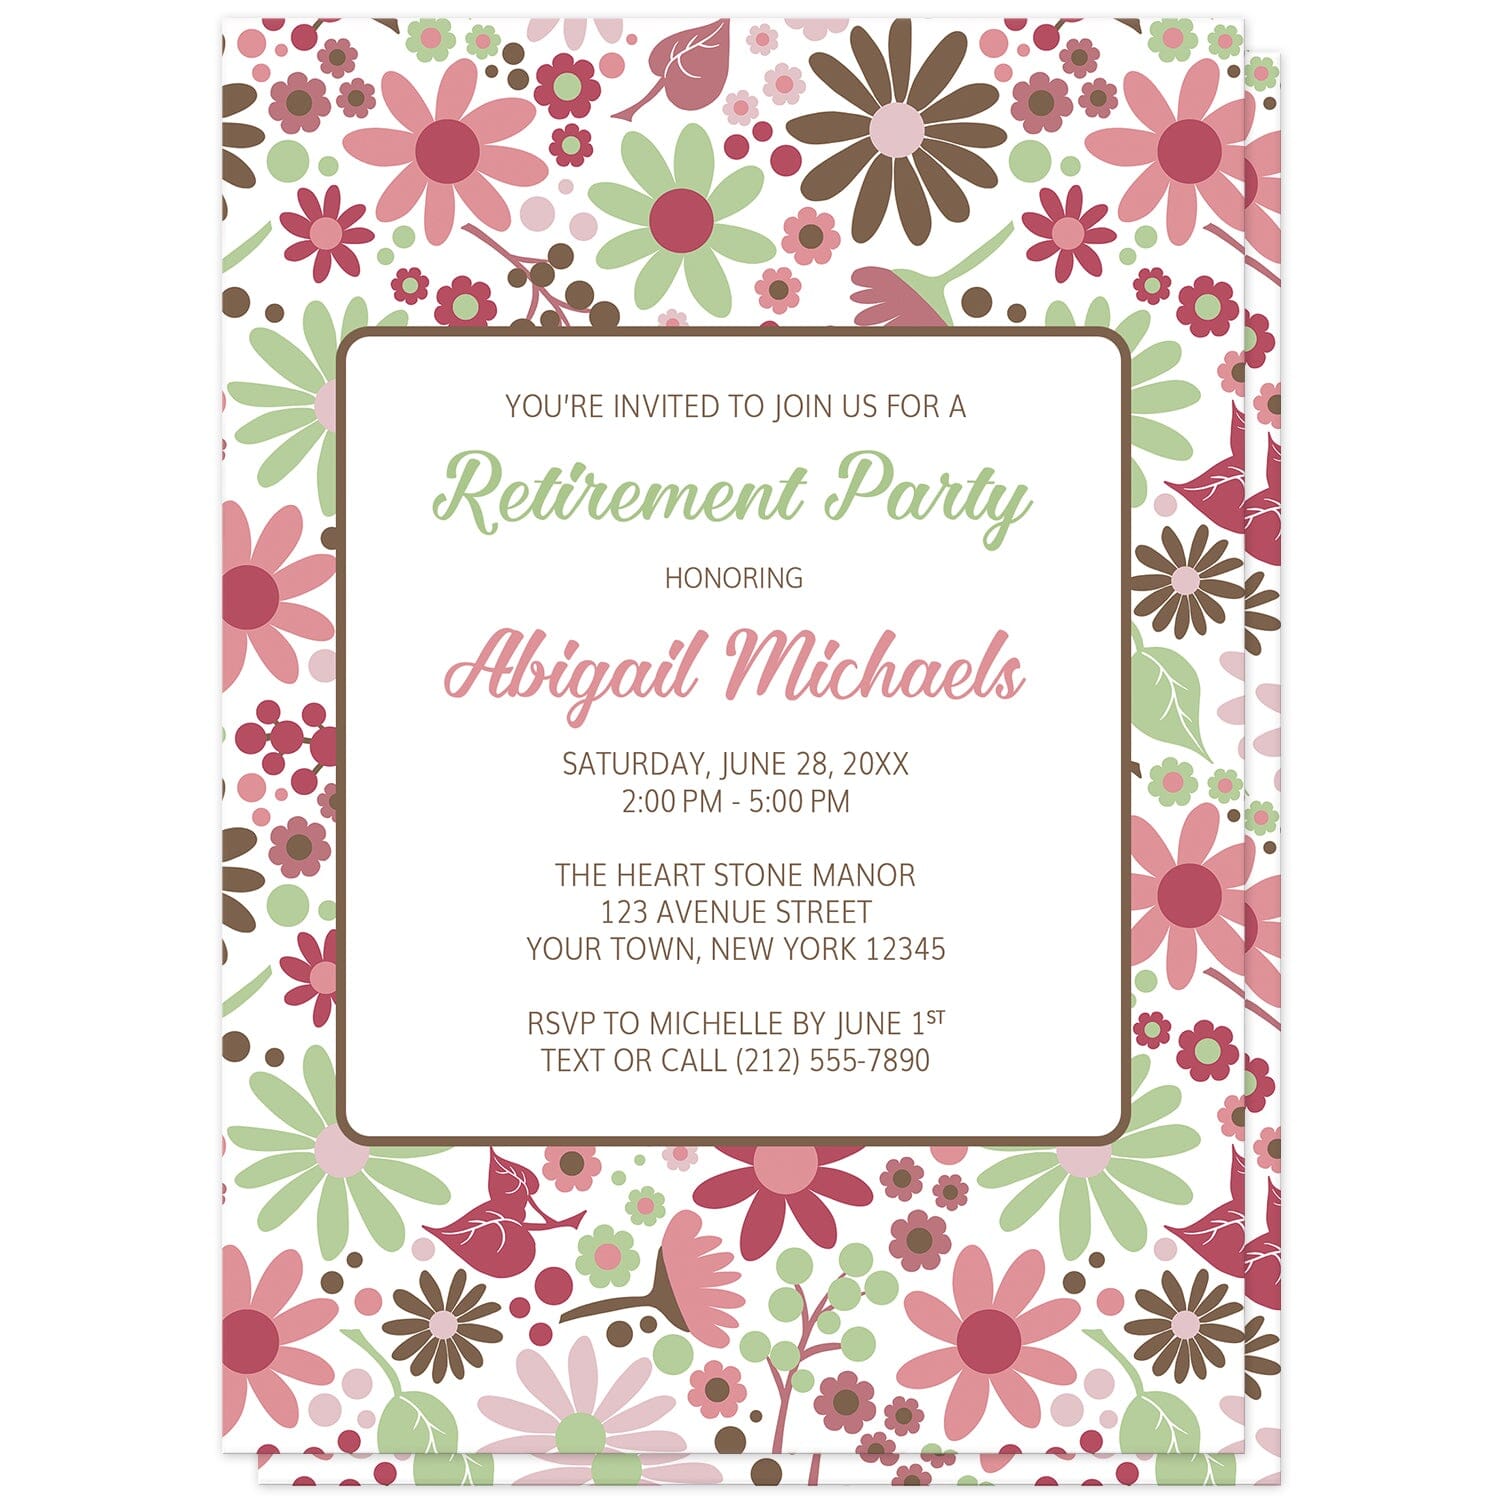 Berry Green Summer Flowers Retirement Party Invitations (front) at Artistically Invited.  Beautiful berry green summer flowers retirement party invitations designed with a pretty summer floral pattern in different hues of berry pink with green and brown. Your personalizes retirement party details are custom printed in green, pink, and brown over white in the center area of the invitations.